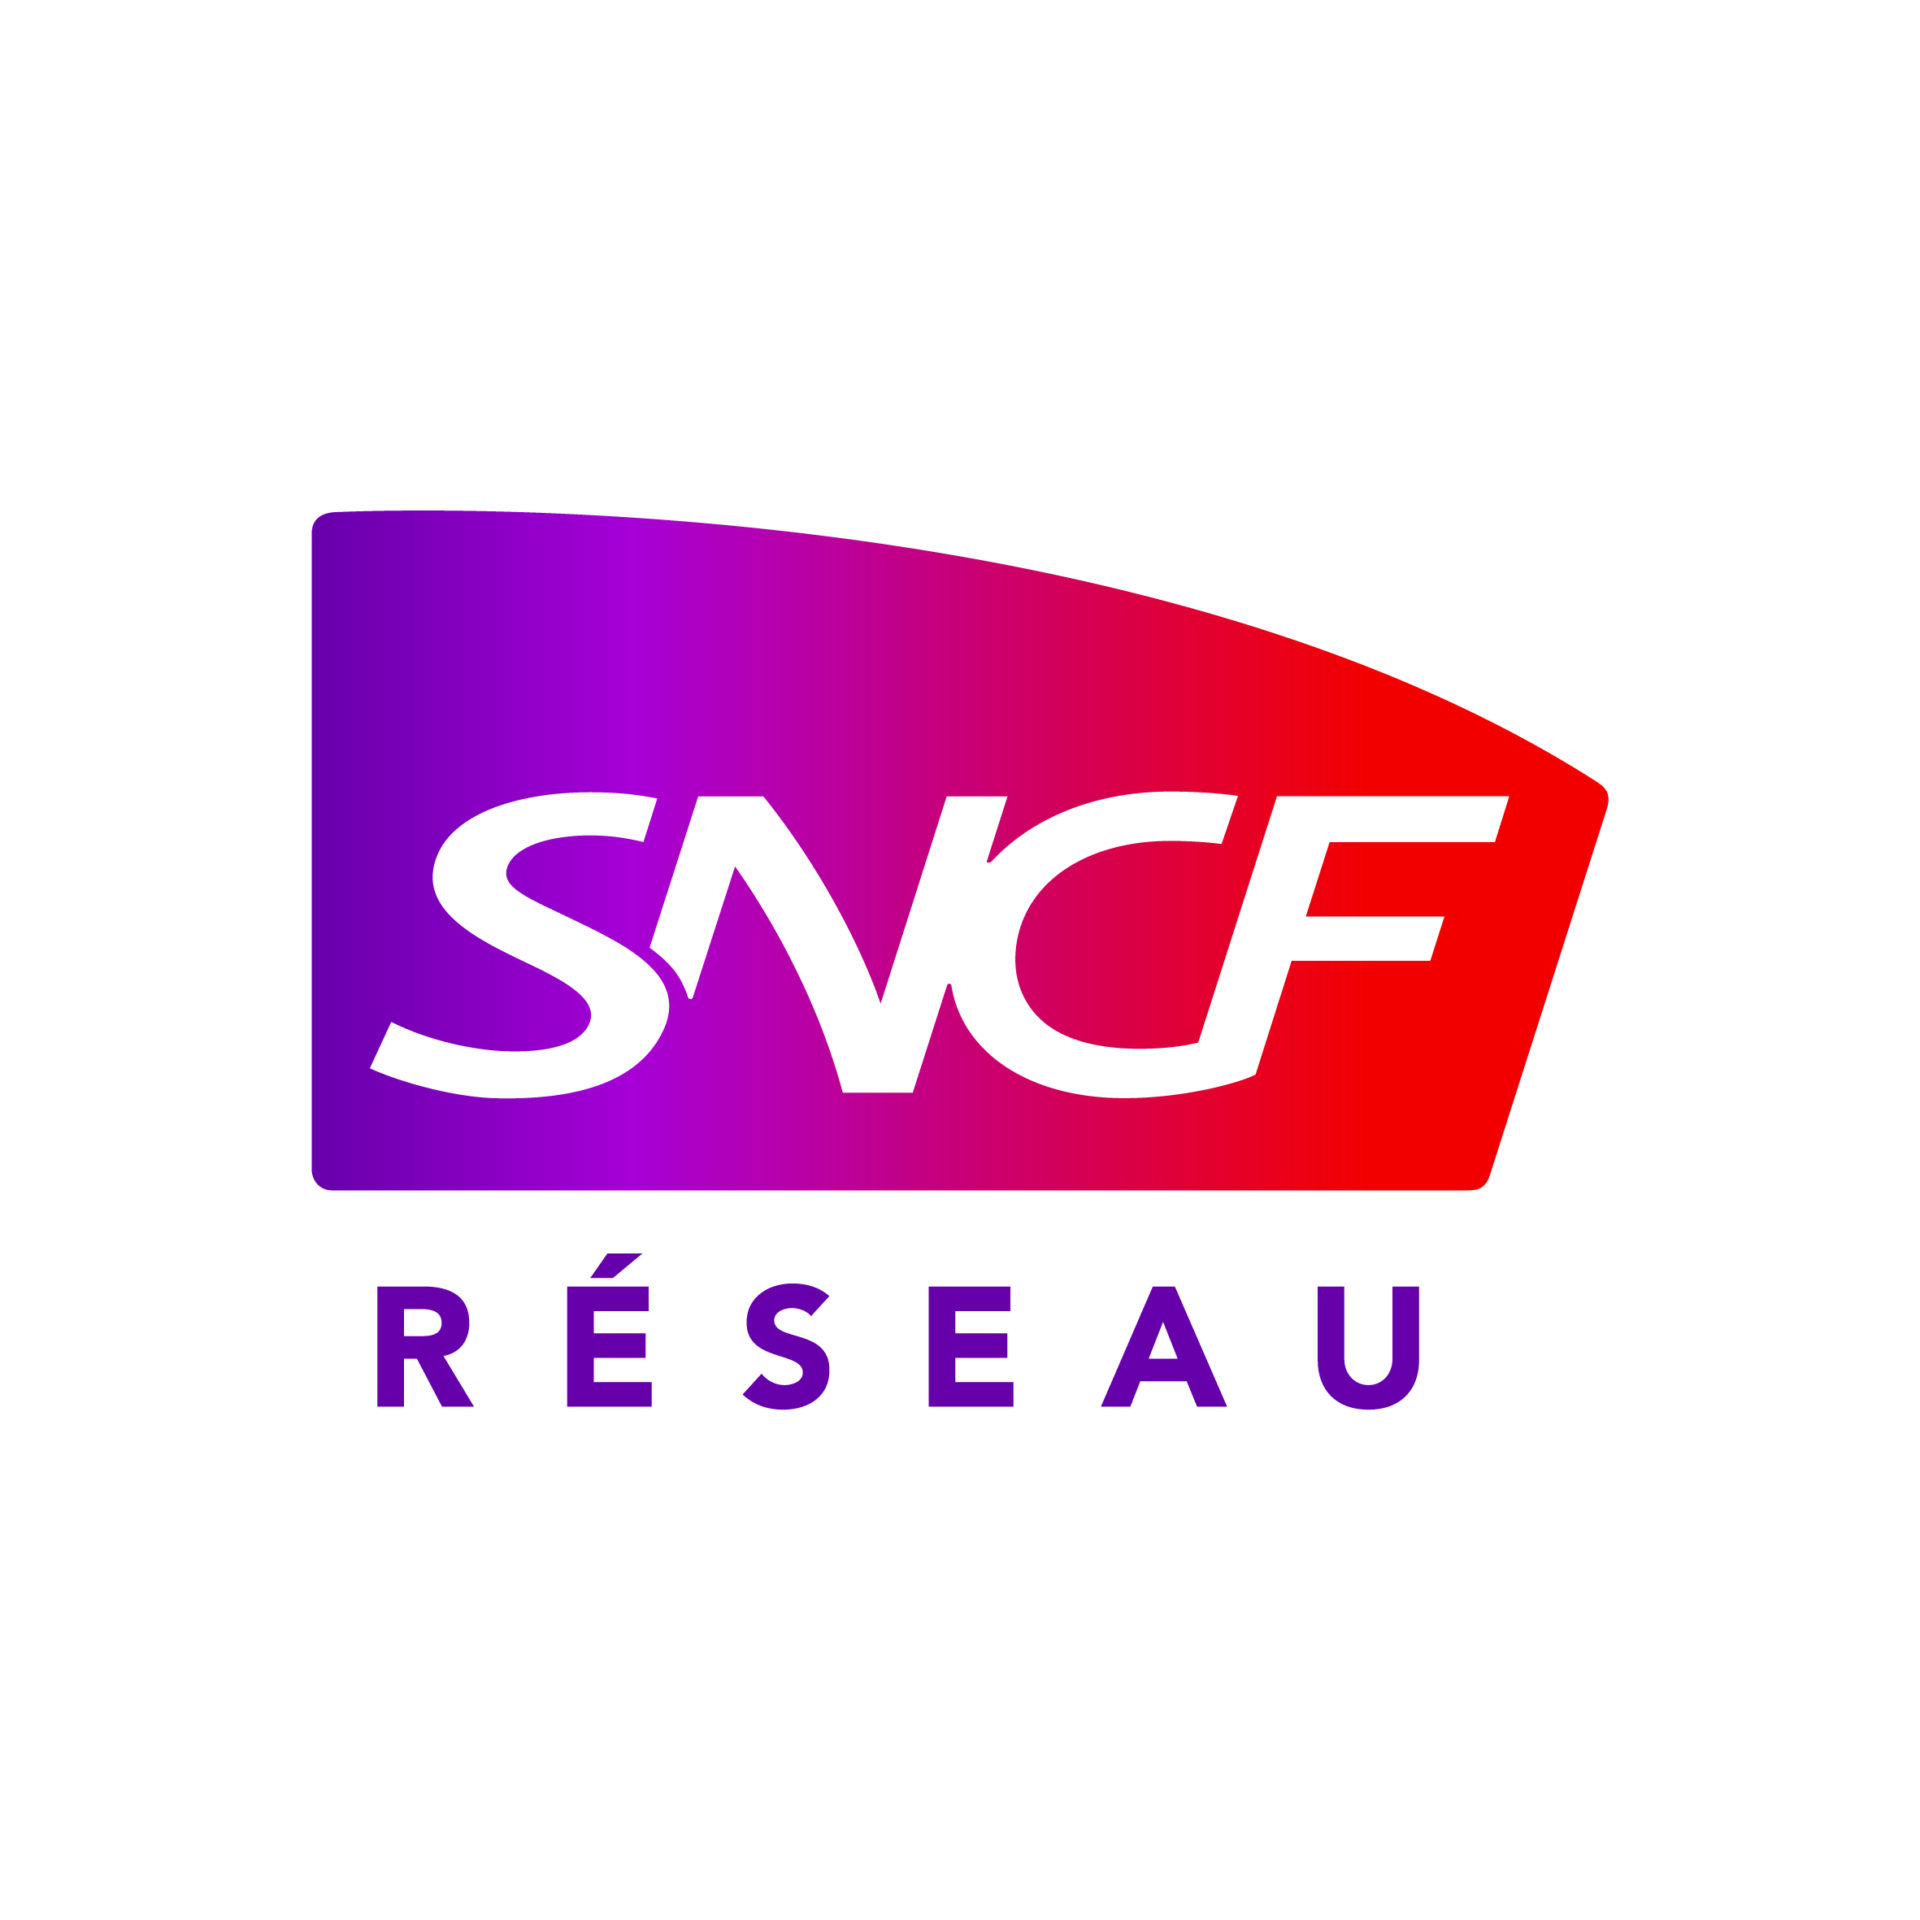 SNCF Réseau: Sharing Reliable Data and Best Practices to Optimize Management of France’s Rail Network